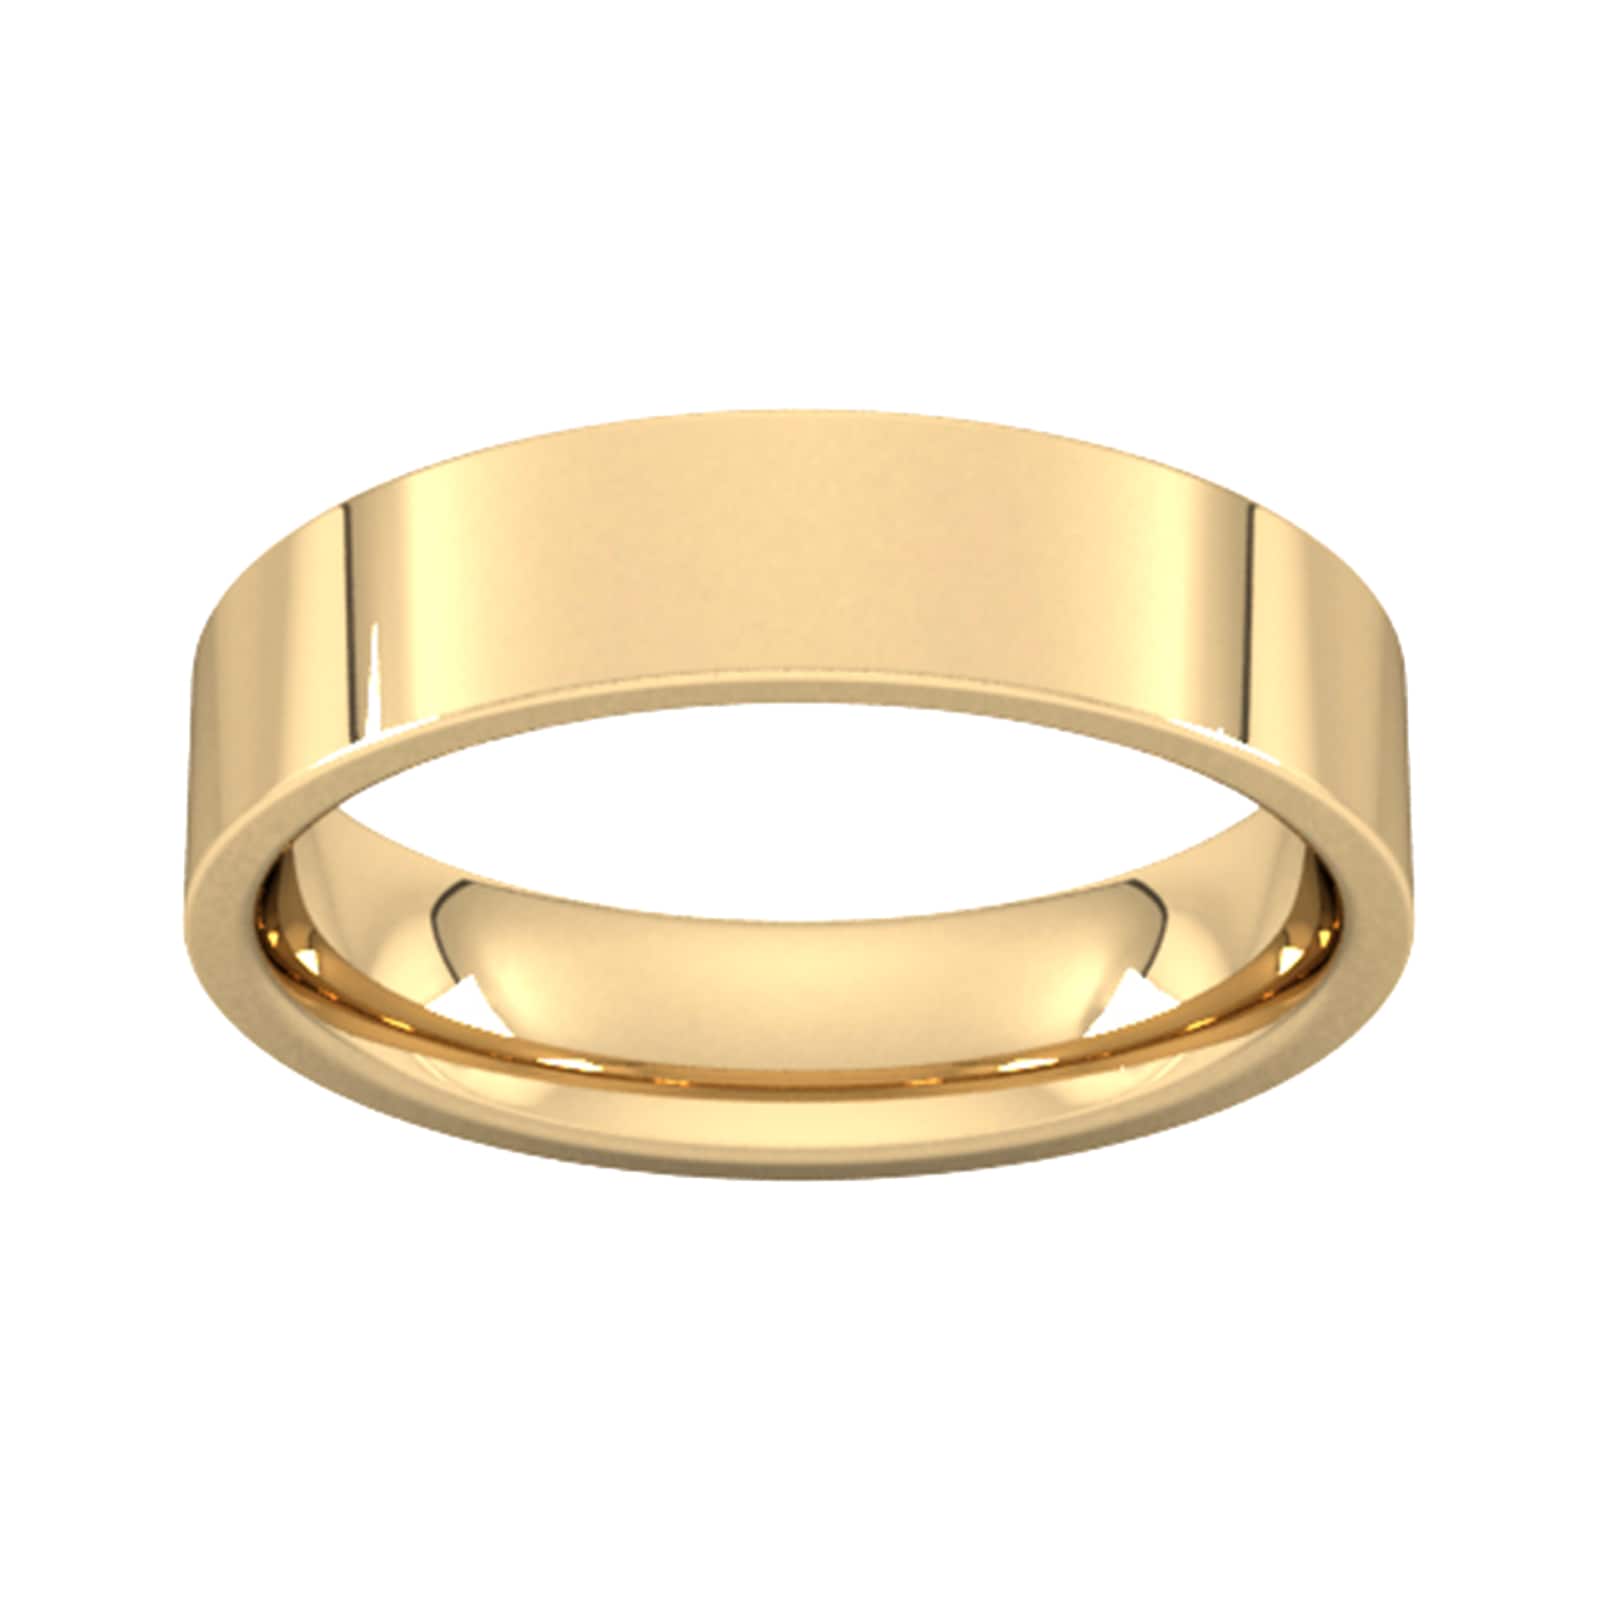 5mm Flat Court Heavy Wedding Ring In 9 Carat Yellow Gold - Ring Size P